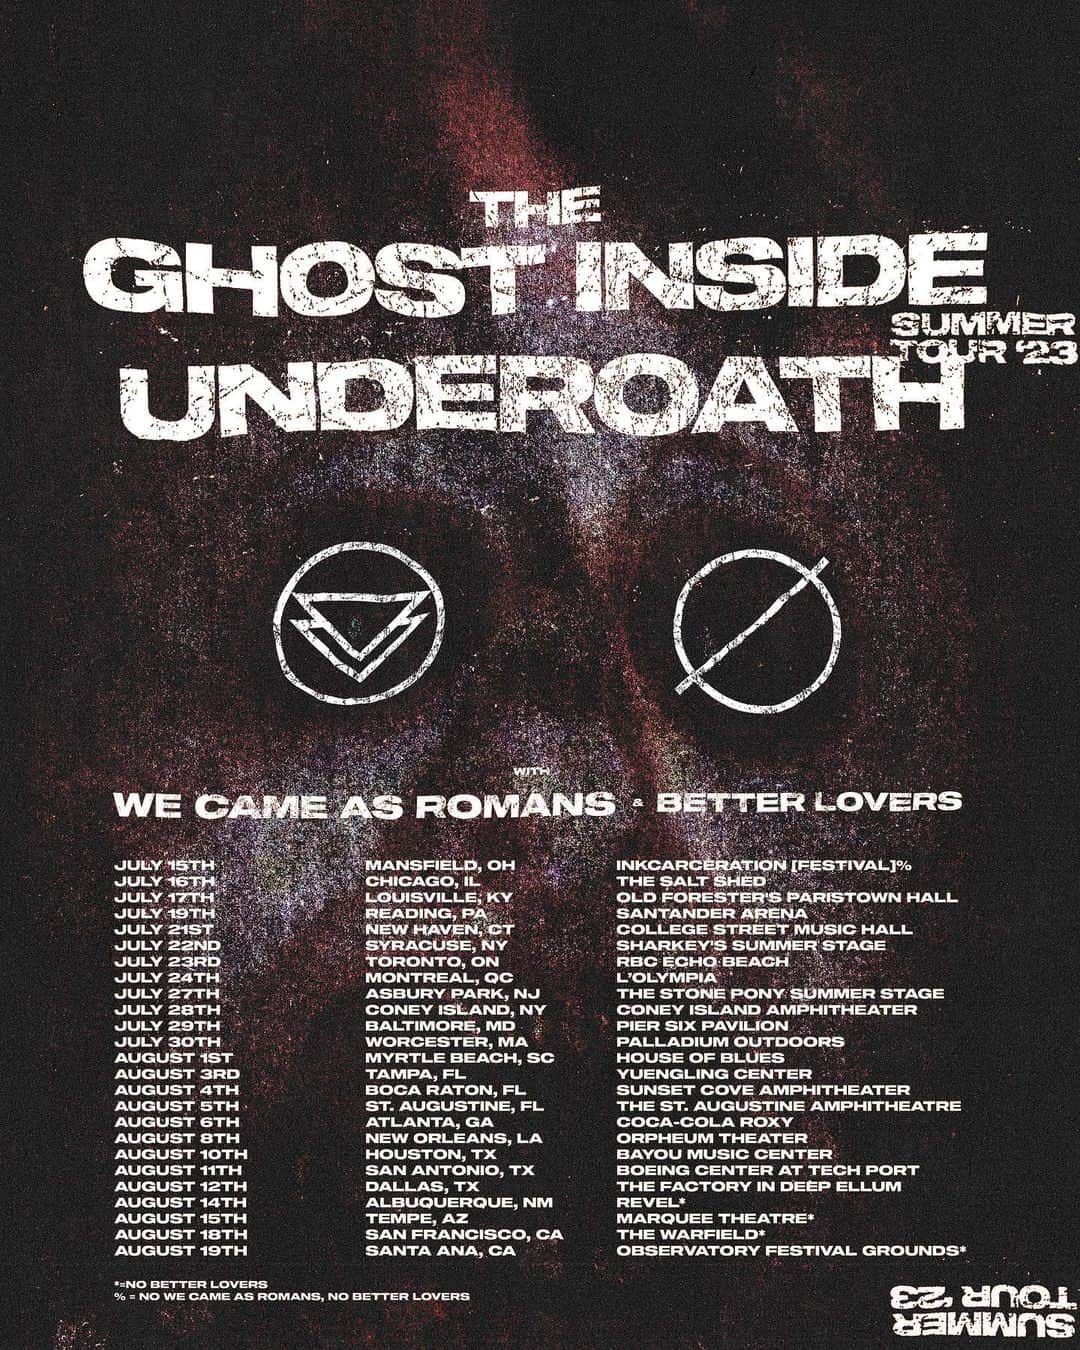 We Came as Romansのインスタグラム：「See you all this summer with @theghostinside, @underoathband and @betterloversband! 🔥 Grab your tickets at iamdarkbloom.com  Grab presale & VIP now*  *TGI PASSWORD: OUTCAST *UO PASSWORD: LETGO  7/16: Chicago, IL // @ The Salt Shed 7/17: Louisville, KY // @ Old Forester's Paristown Hall 7/19: Reading, PA // @ Santander Arena 7/21: New Haven, CT // @ College Street Music Hall 7/22: Liverpool, NY // @ Sharkey's 7/23: Toronto, ON // @ RBC Echo Beach 7/24: Montreal, QC // @ L'Olympia  7/27: Asbury Park, NJ // @ Stone Pony Summer Stage 7/28: Brooklyn, NY // @ Coney Island Amphitheater 7/29: Baltimore, MD // @ Pier Six Pavilion 7/30: Worcester, MA // @ The Palladium Outdoors 8/1: Myrtle Beach, SC // @ House of Blues 8/3: Tampa, FL // @ Yuengling Center 8/4: Boca Raton, FL // @ Sunset Cove Amphitheater 8/5: St. Augustine, FL // @ St. Augustine Amphitheater 8/6: Atlanta, GA // @ Coca Cola Roxy 8/8: New Orleans, LA // @ Orpheum Theater 8/10: Houston, TX // @ Bayou Music Center 8/11: San Antonio, TX // @ Boeing Center at Tech Port 8/12: Dallas, TX // @ The Factory in Deep Ellum 8/14: Albuquerque, NM // @ Revel 8/15: Tempe, AZ // @ The Marquee 8/18: San Francisco, CA // @ The Warfield 8/19: Santa Ana, CA // @ Observatory Festival Grounds  -- #wecameasromans #underoath #theghostinside #metalcore」